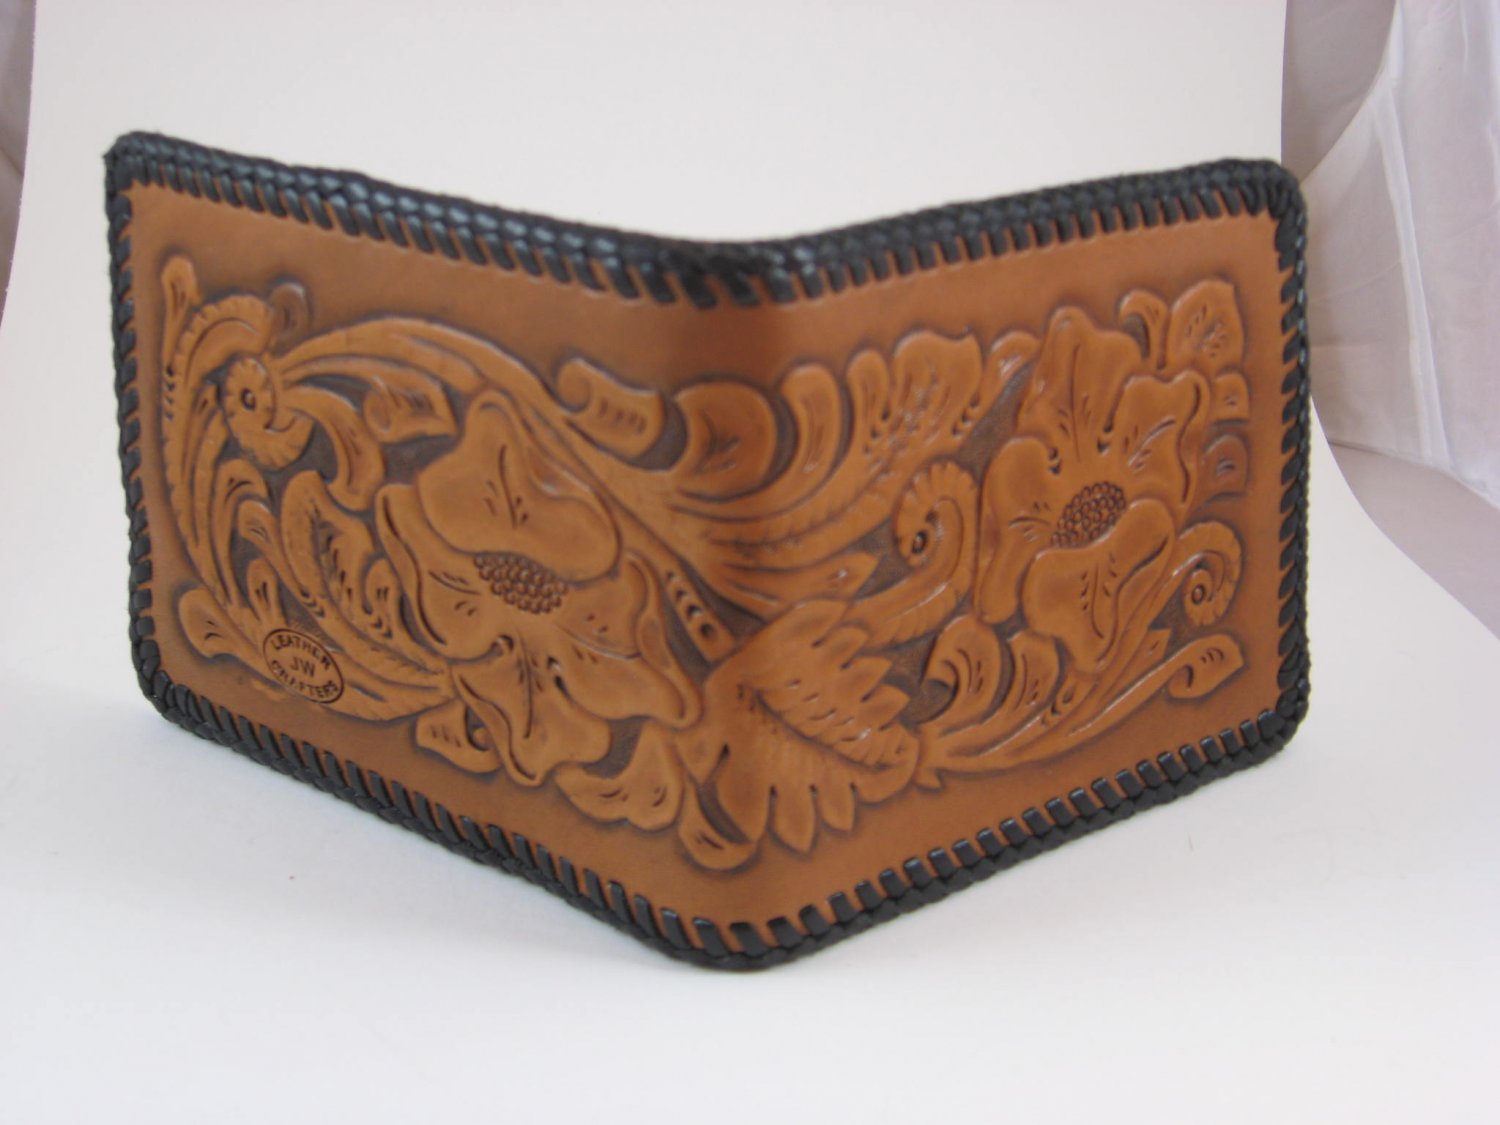 Handtooled Leather Wallets